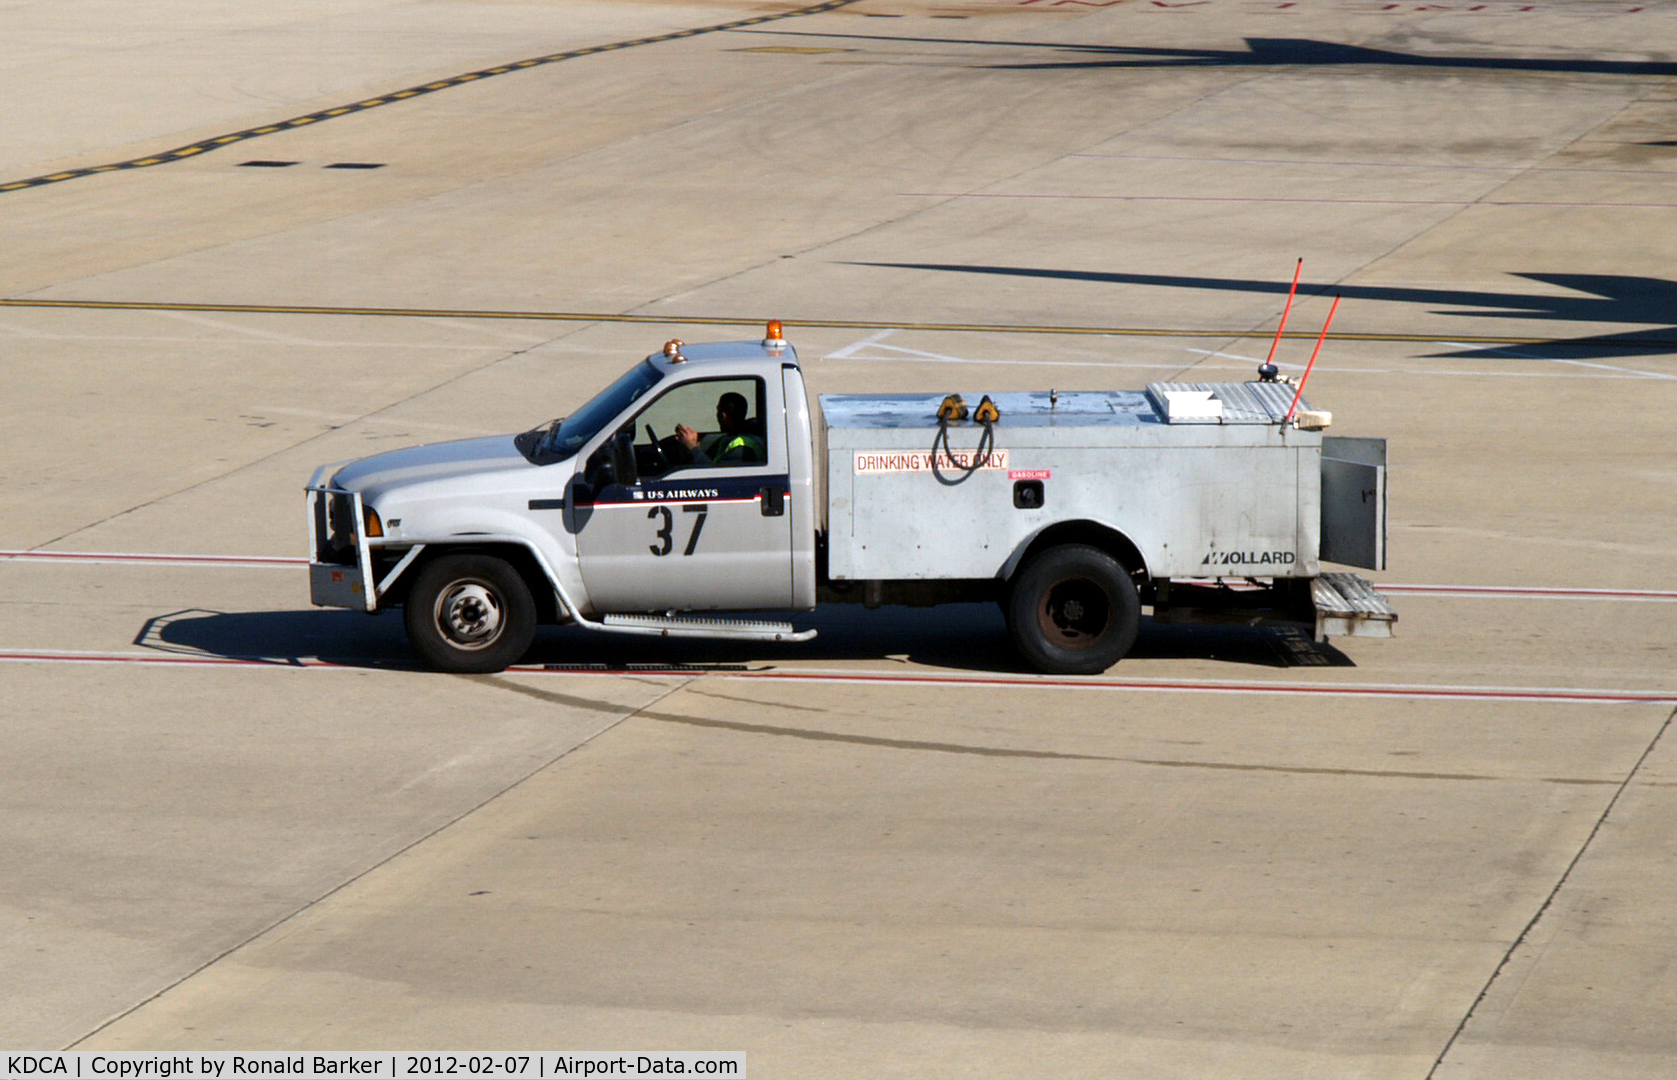 Ronald Reagan Washington National Airport (DCA) - Truck number 37 with drinking water